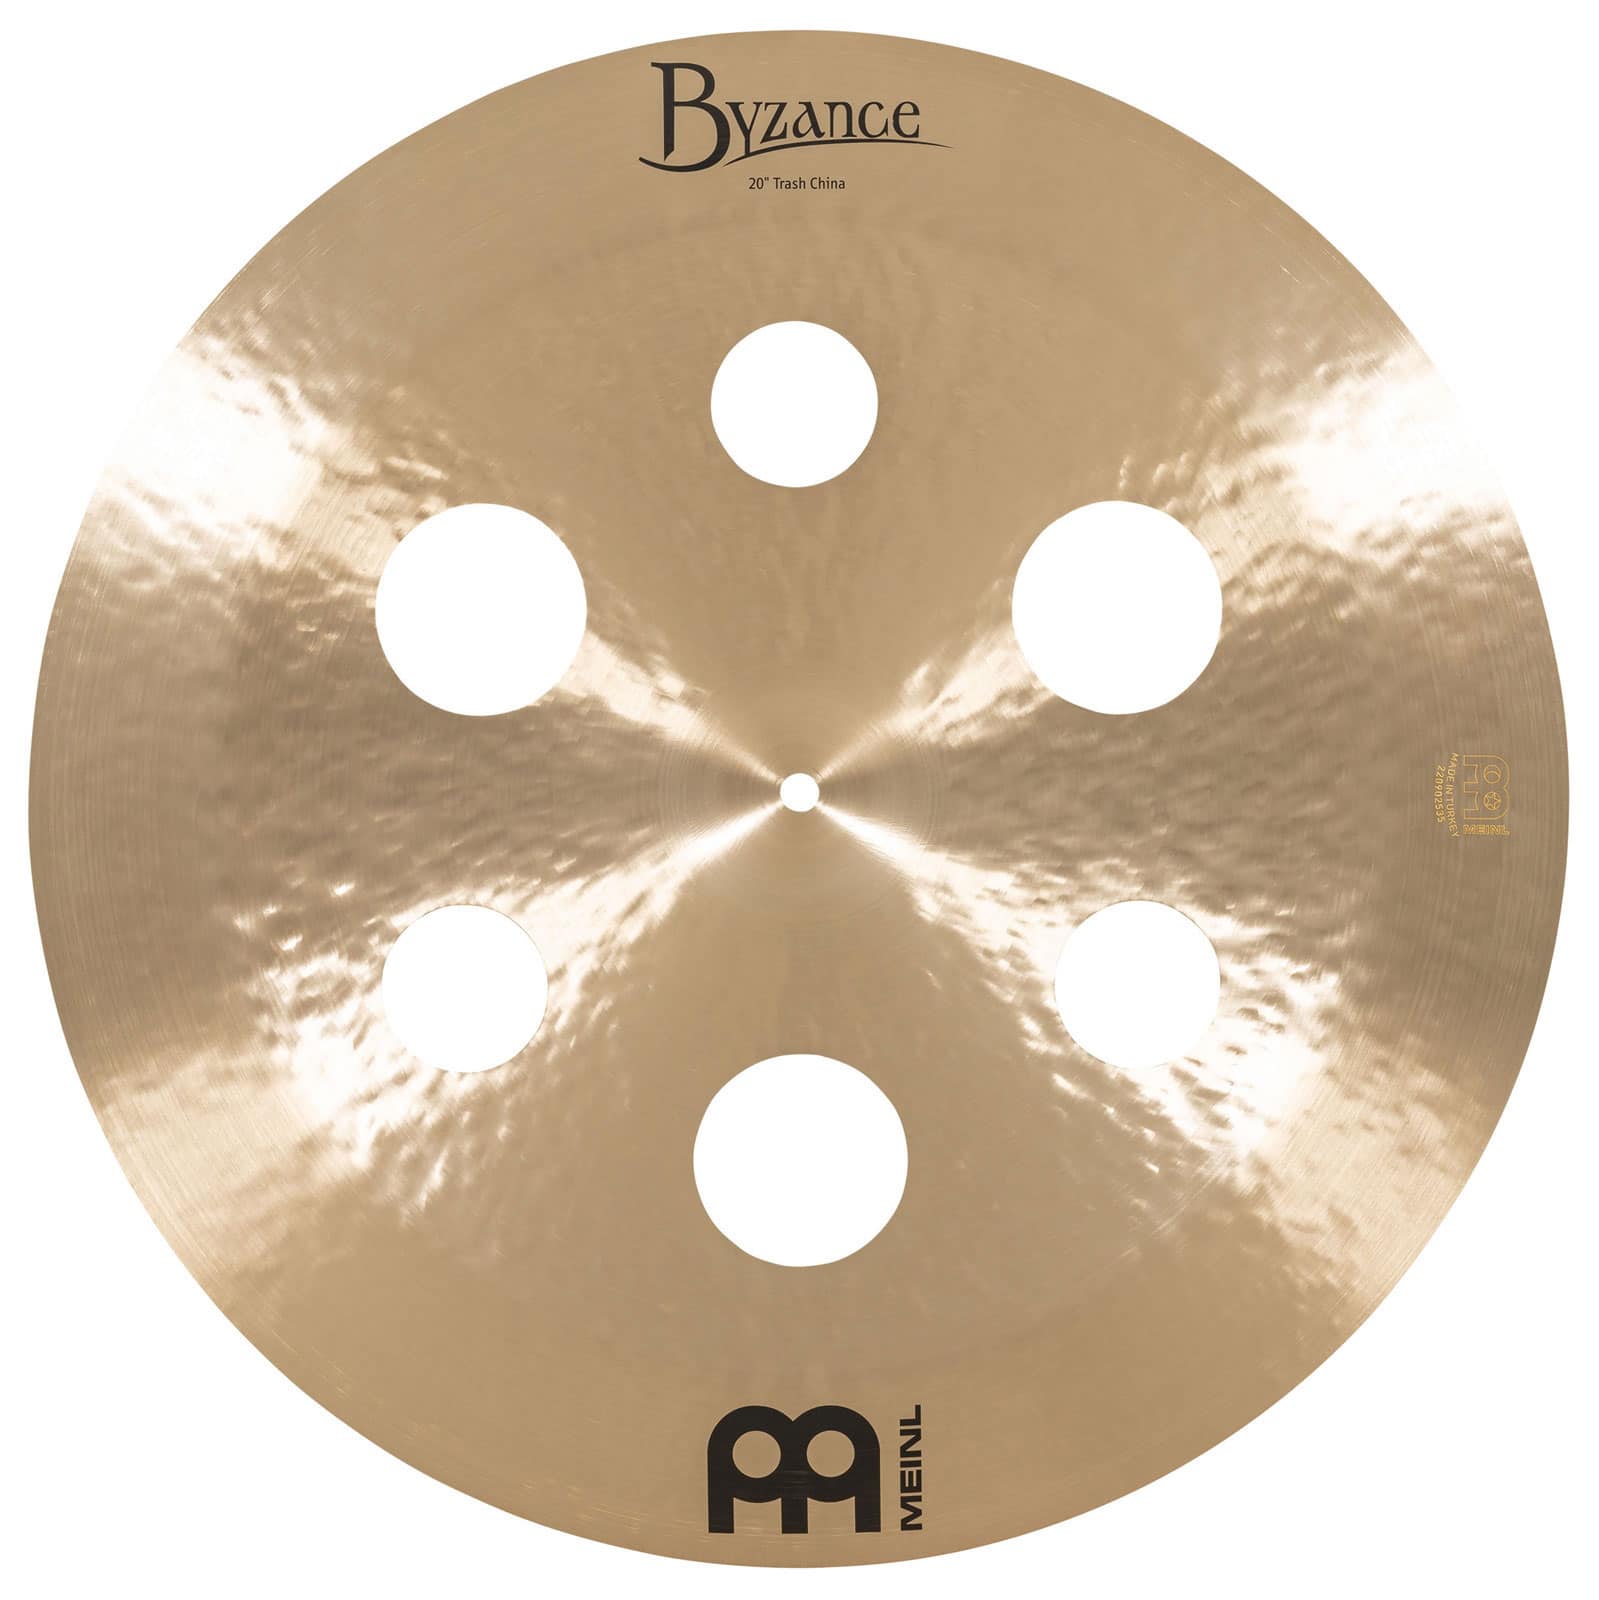 MEINL B20TRCH - CHINOISE BYZANCE TRADITIONAL 20